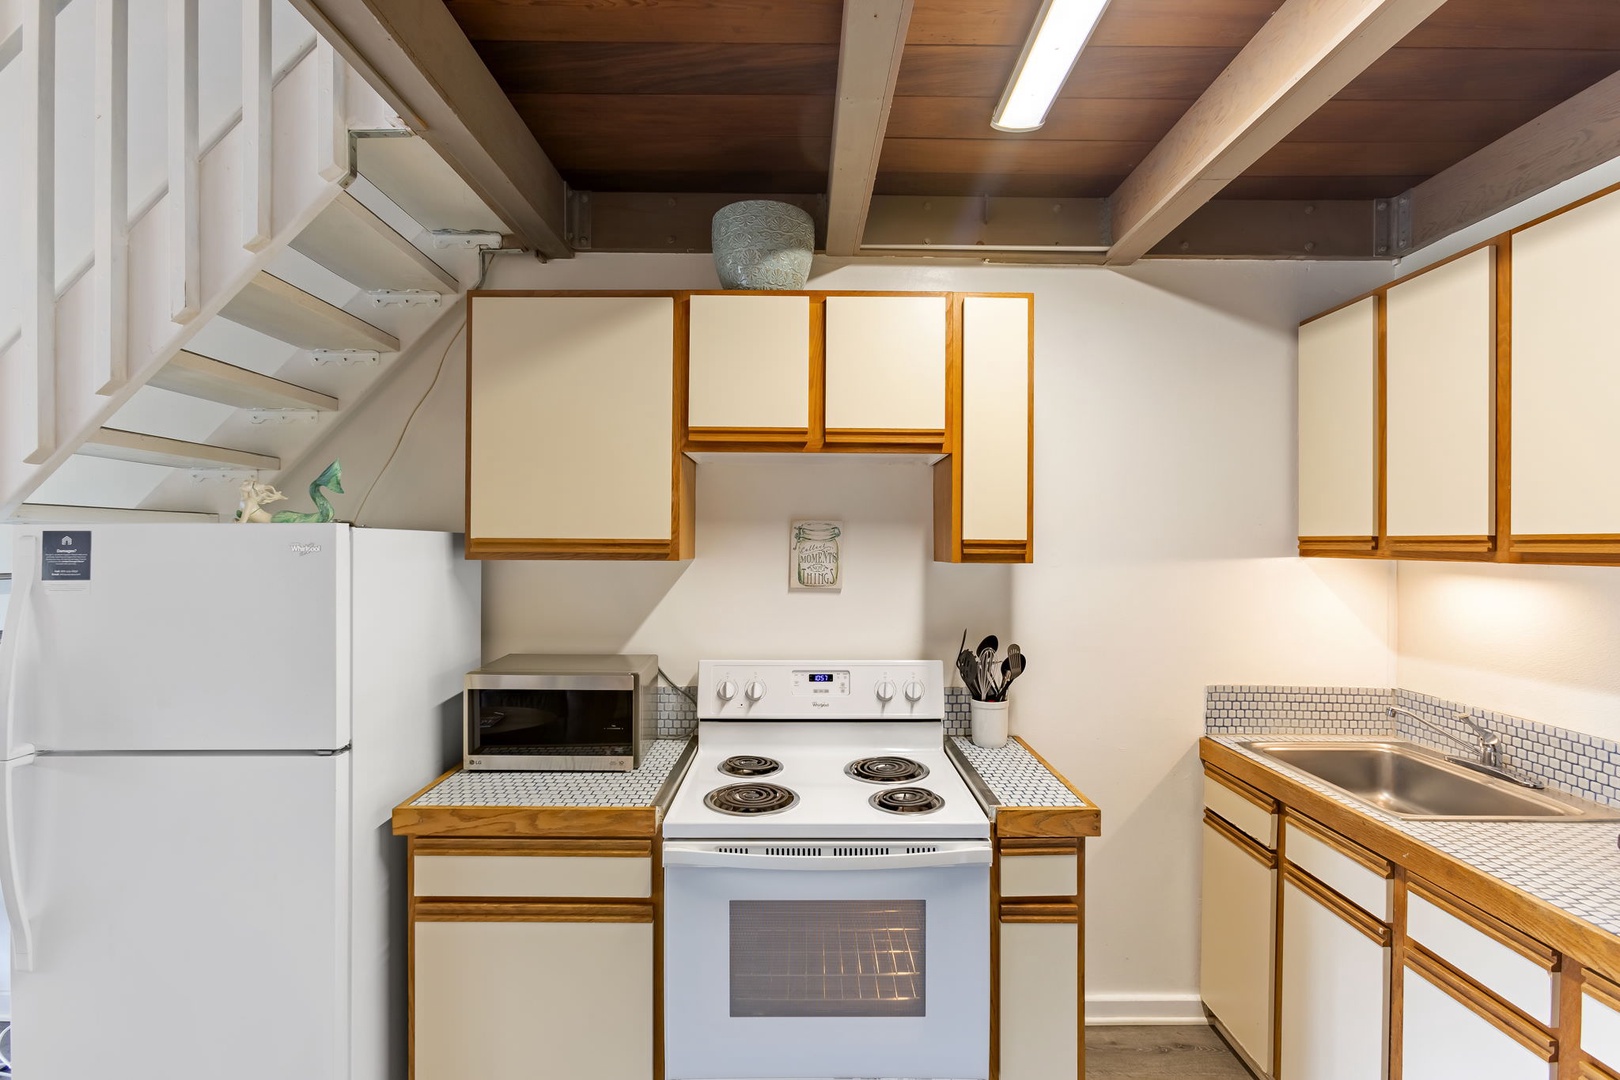 Fully equipped kitchen with cozy counterspace